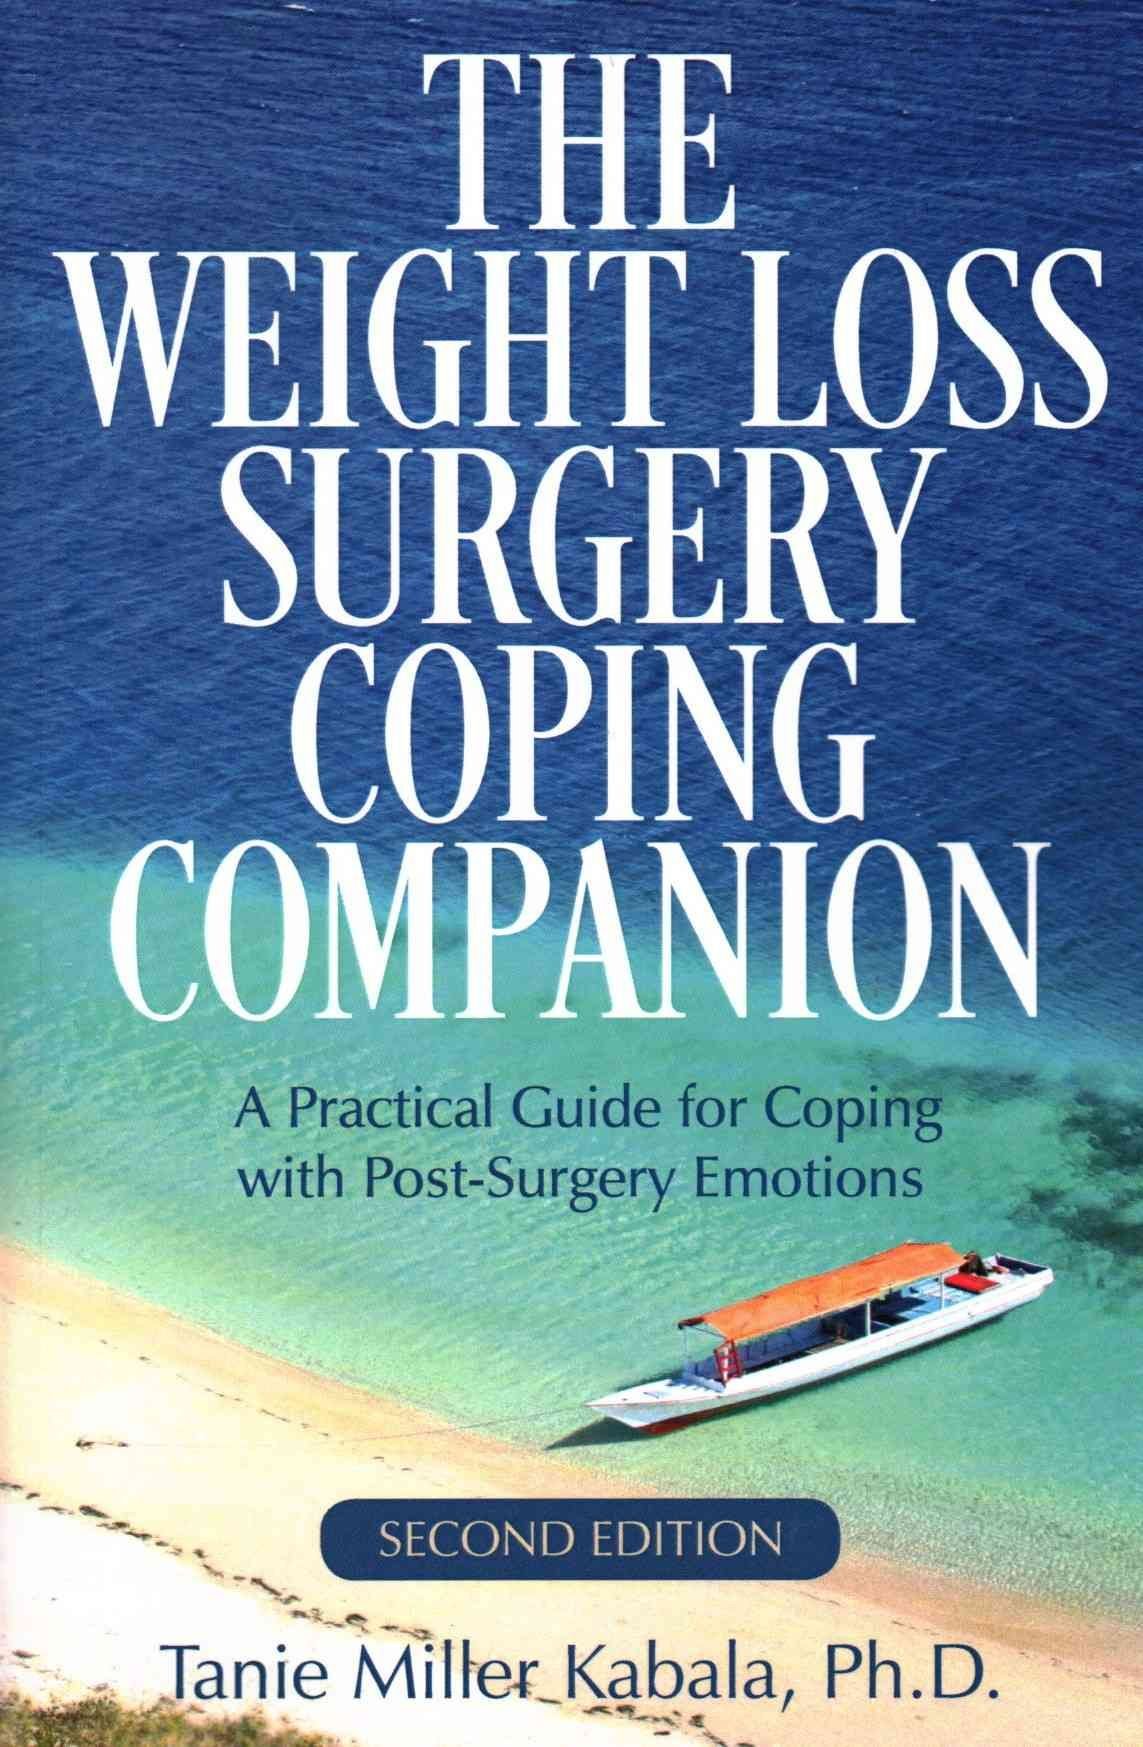 The Weight Loss Surgery Coping Companion